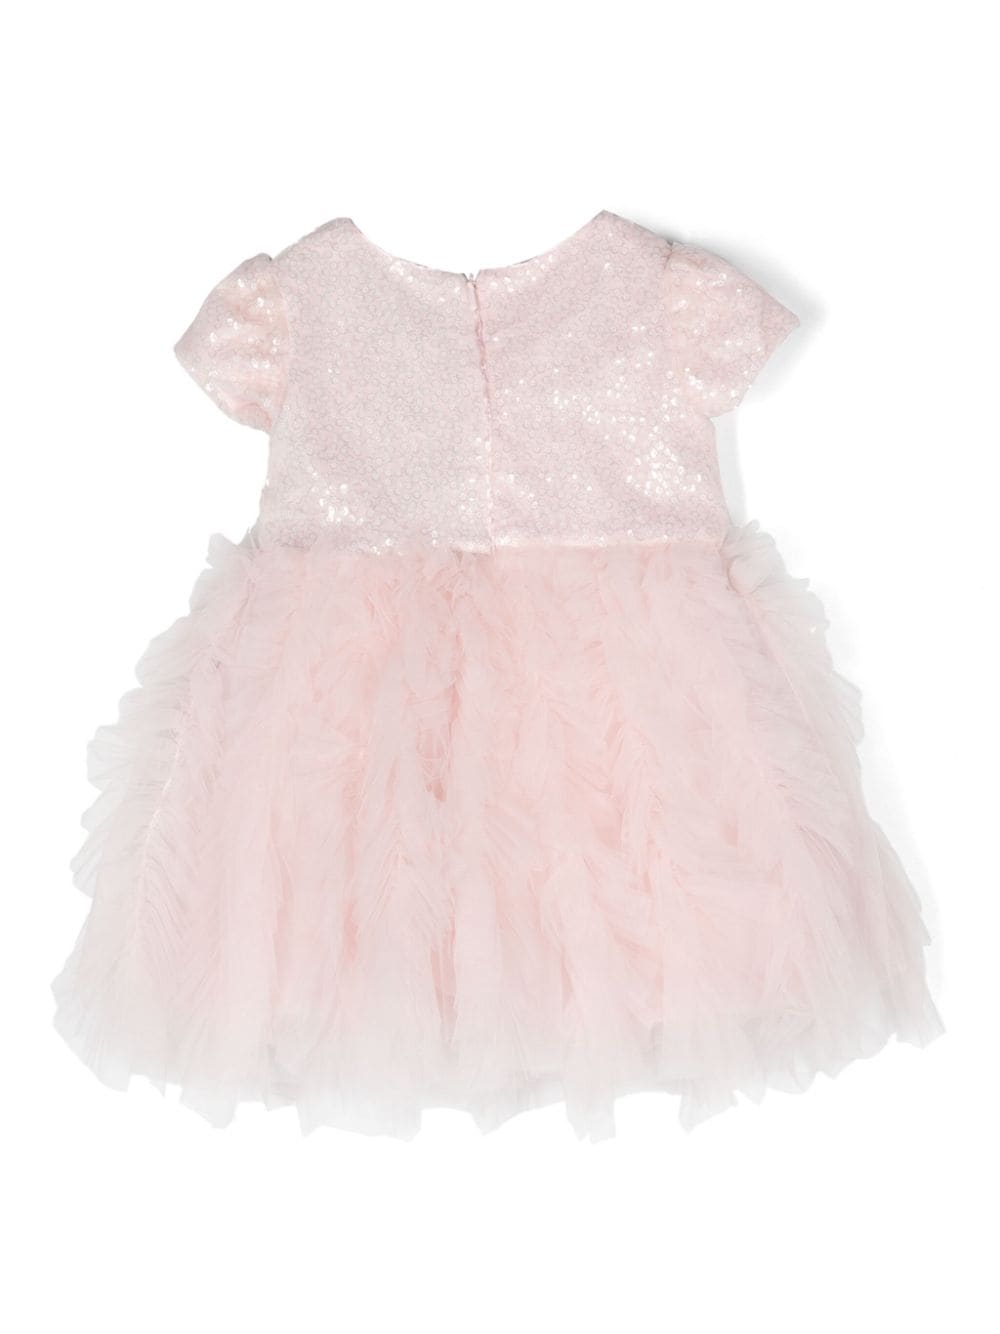 Pink sequin and tulle baby girl dress